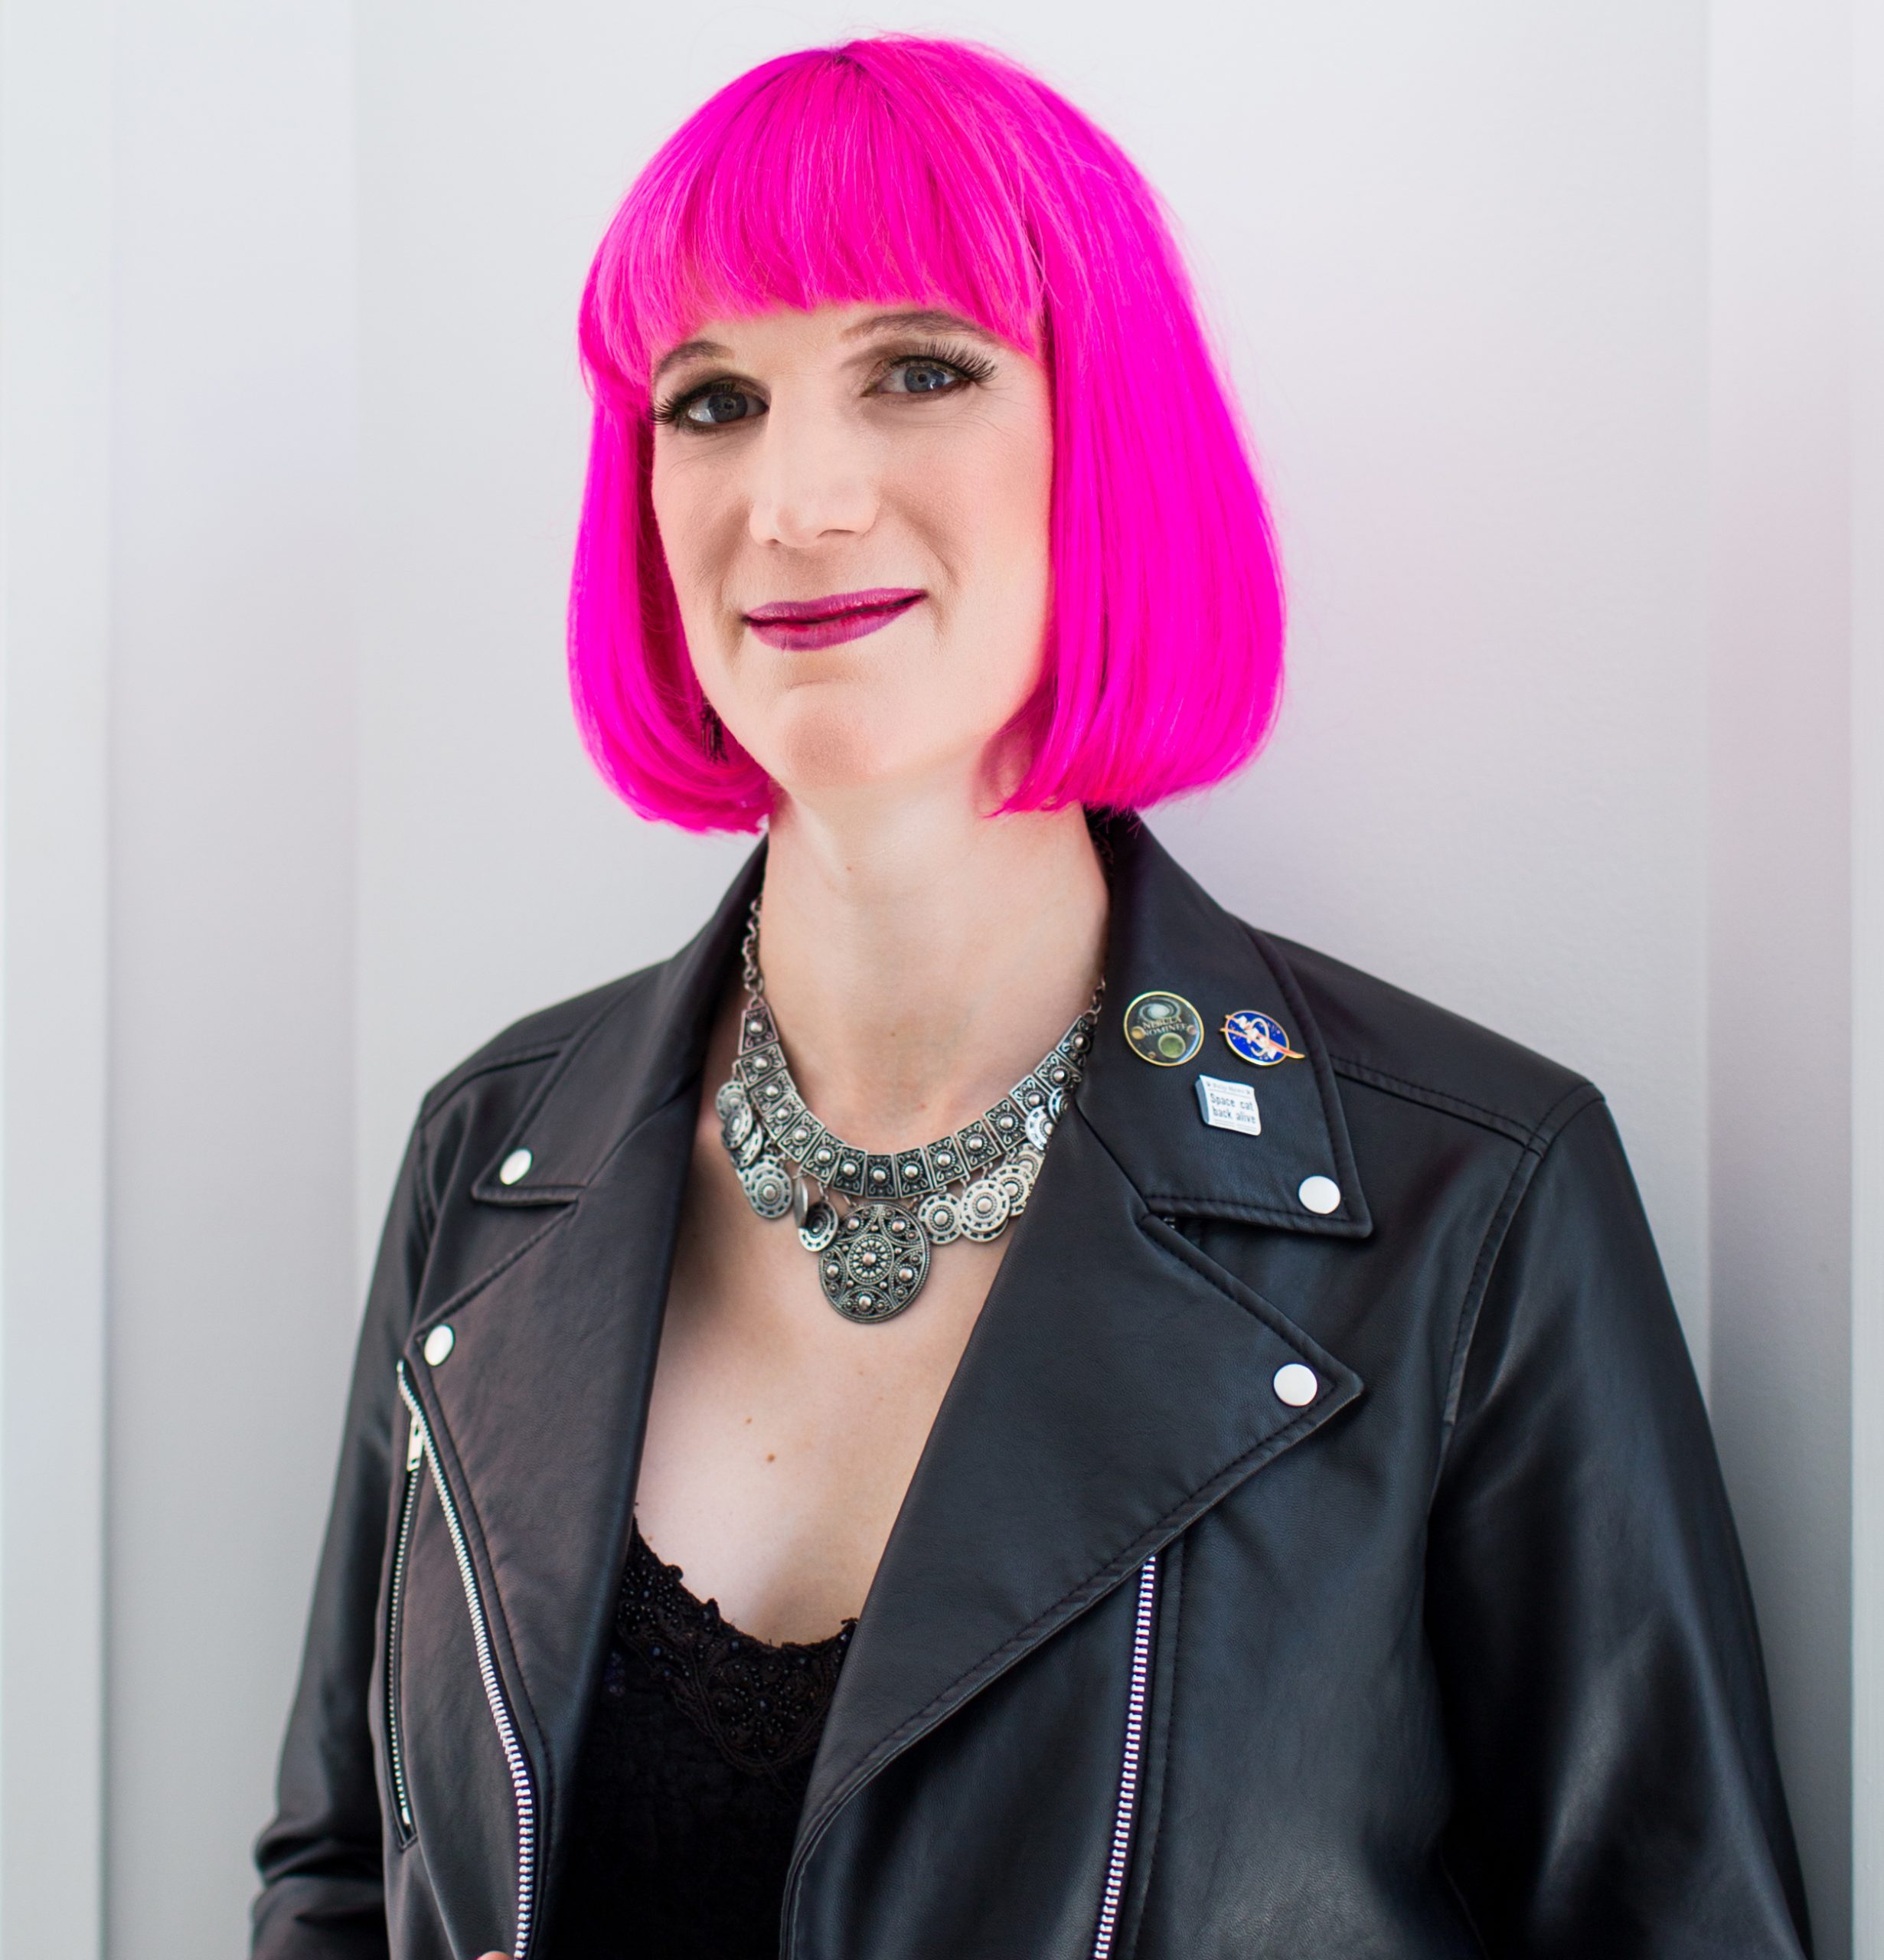 Charlie Jane Anders is pictured in front of a white background. They have light-toned skin and are wearing a black sleeveless dress. They have chin-length hair and bangs colored bright pink.